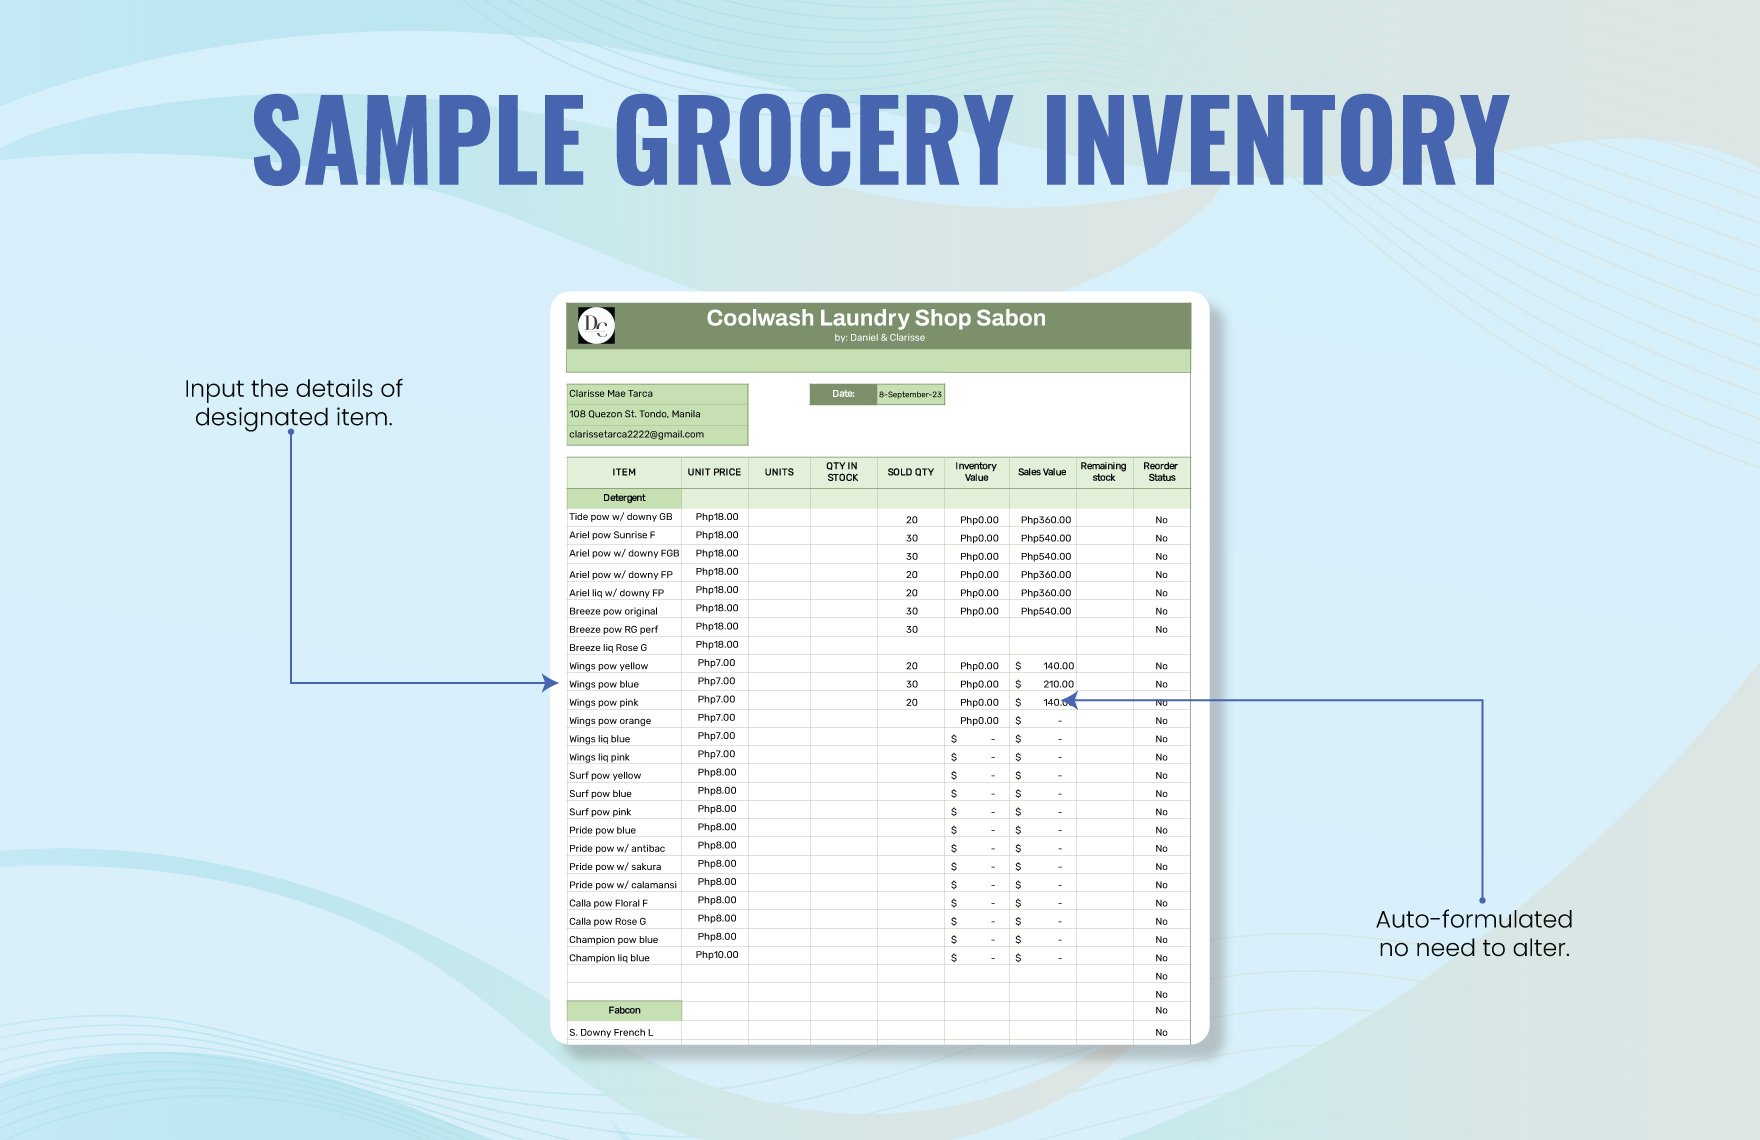 Sample Grocery Inventory Template